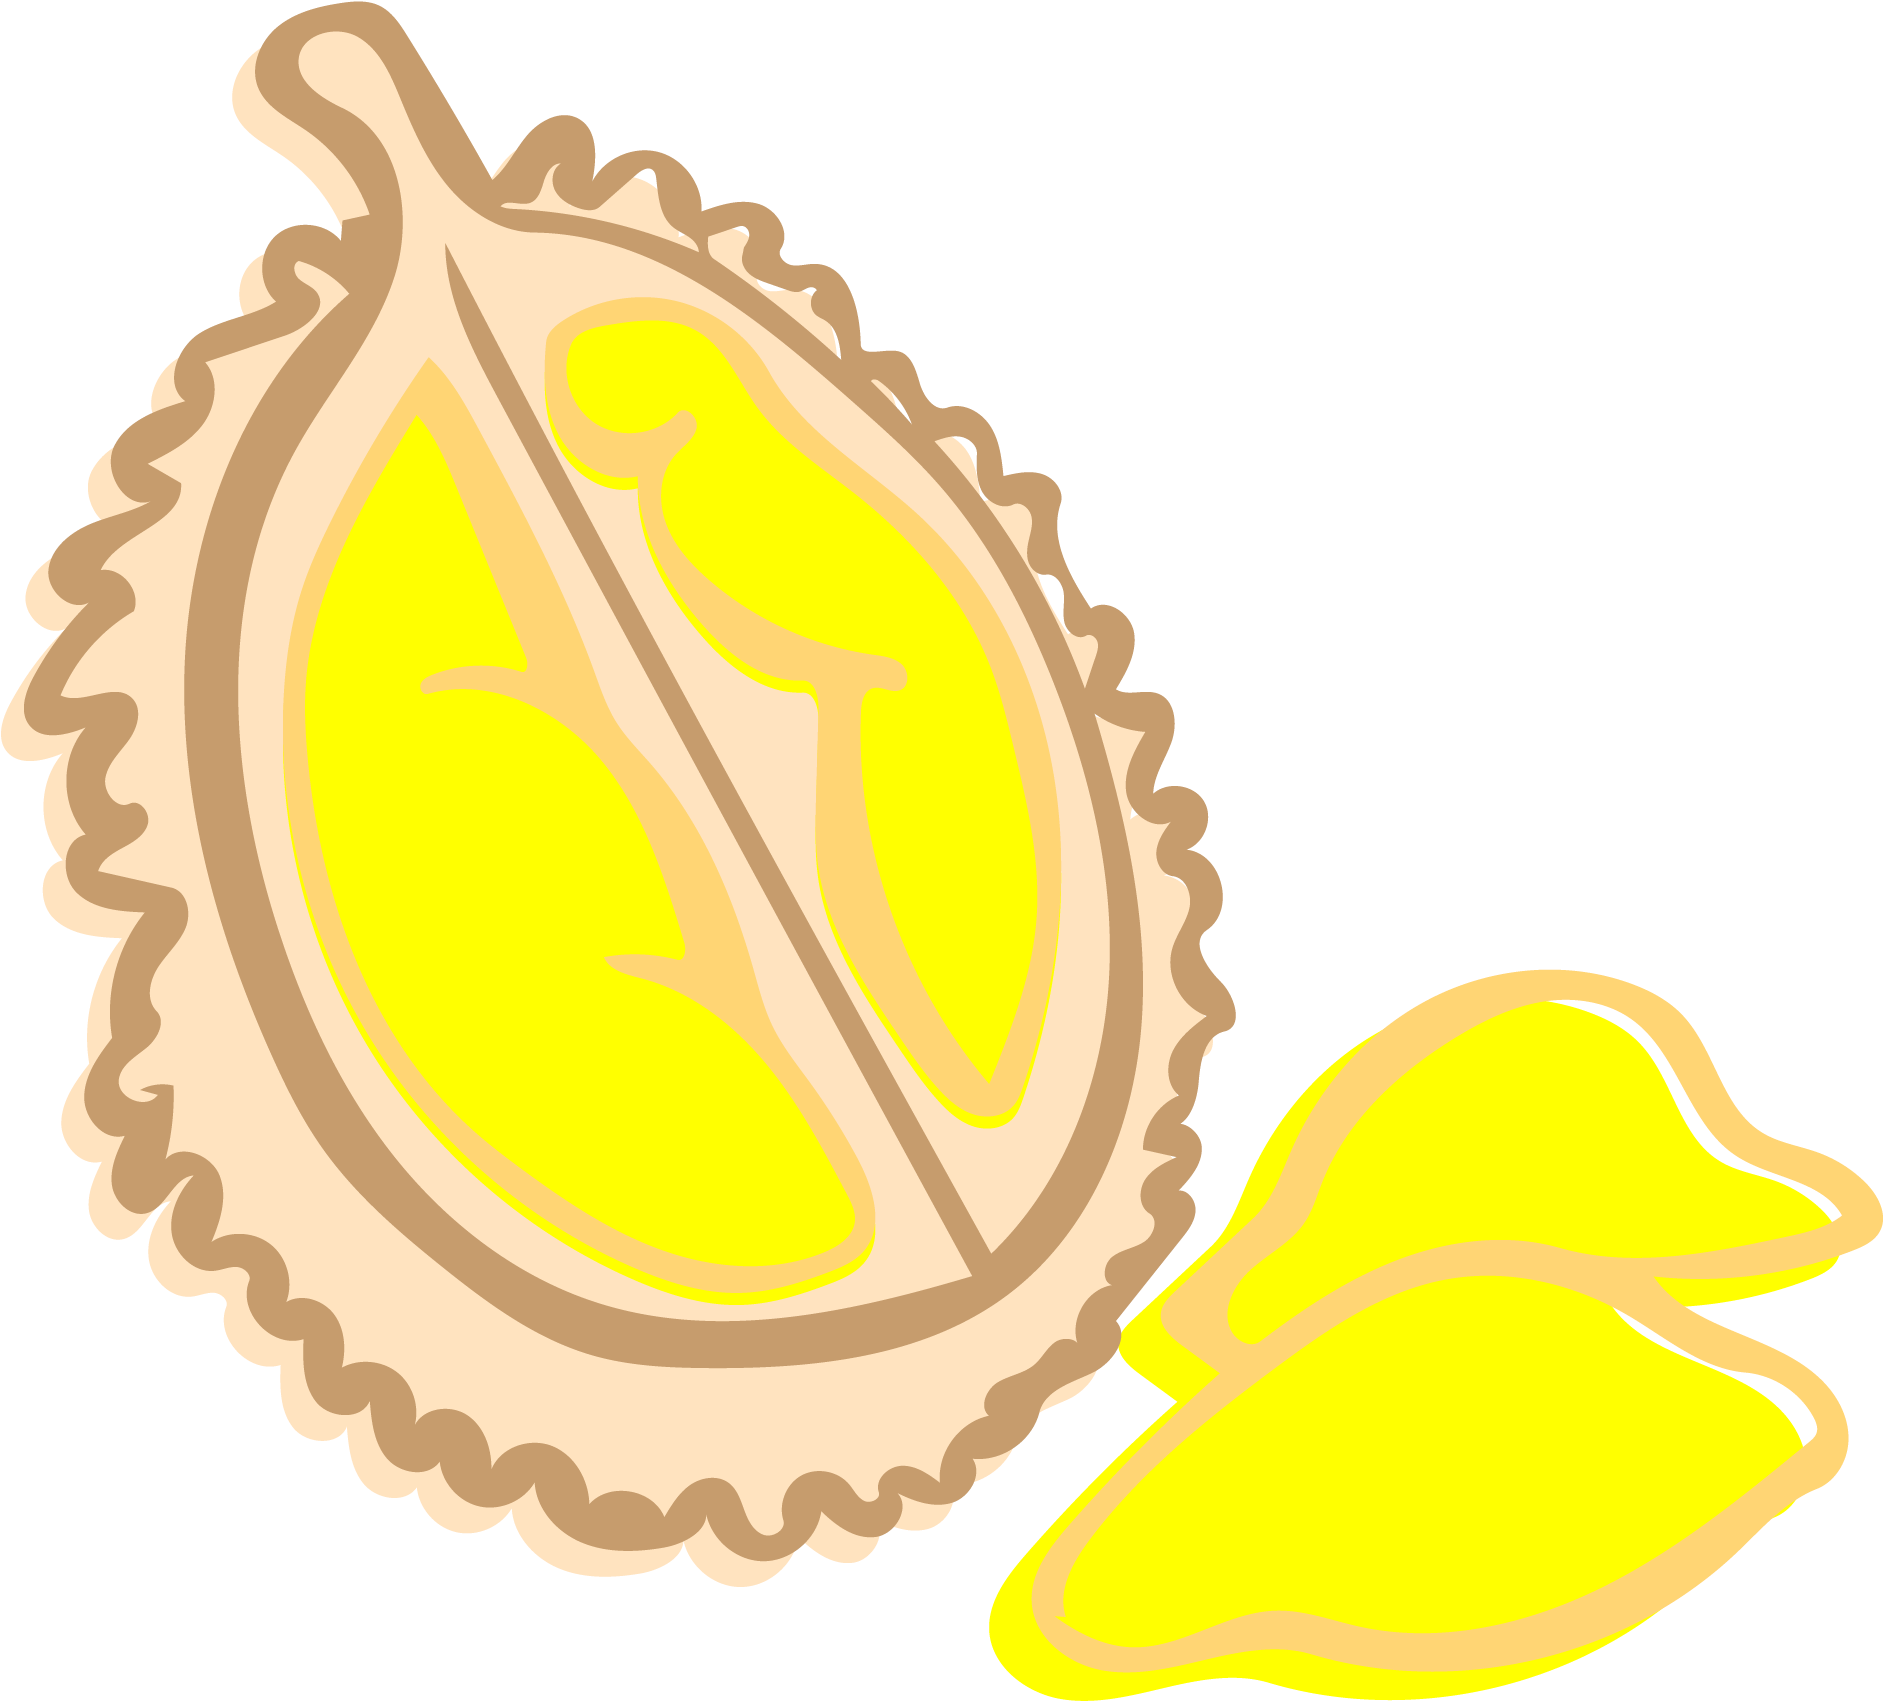 A Yellow Fruit With Yellow Peels